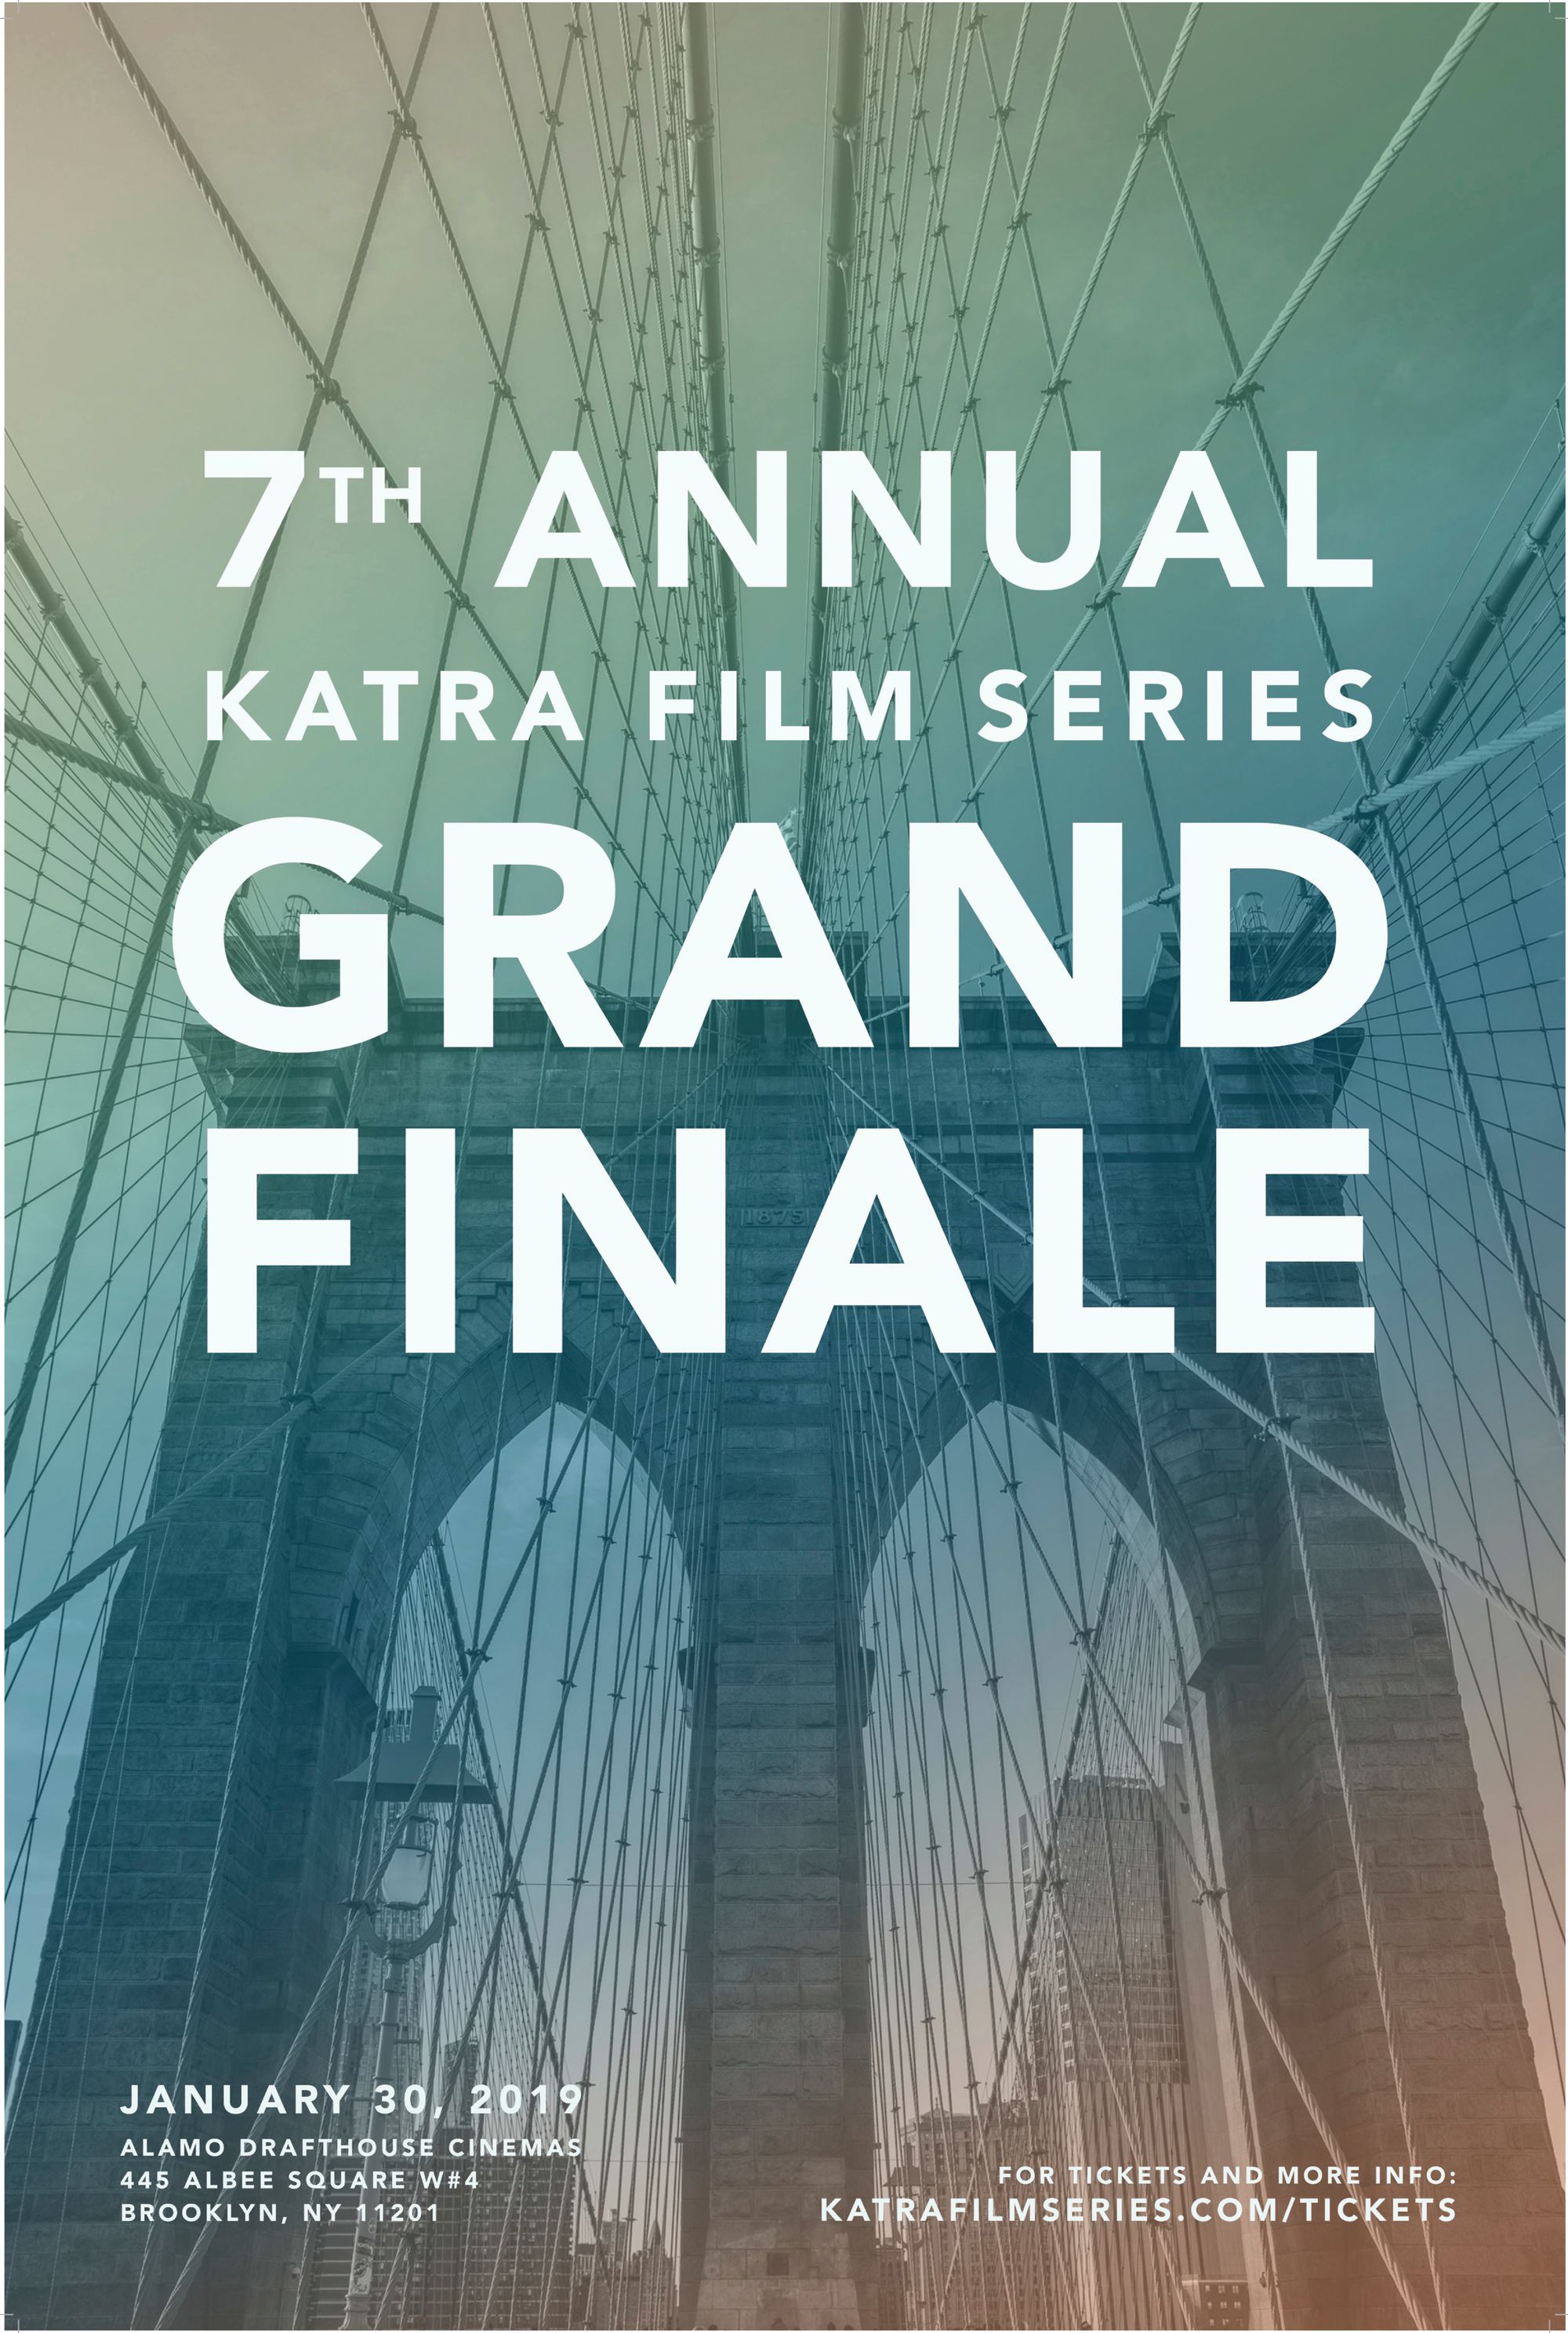 Katra Film Series returns to Alamo Drafthouse for 7th Annual Grand Finale